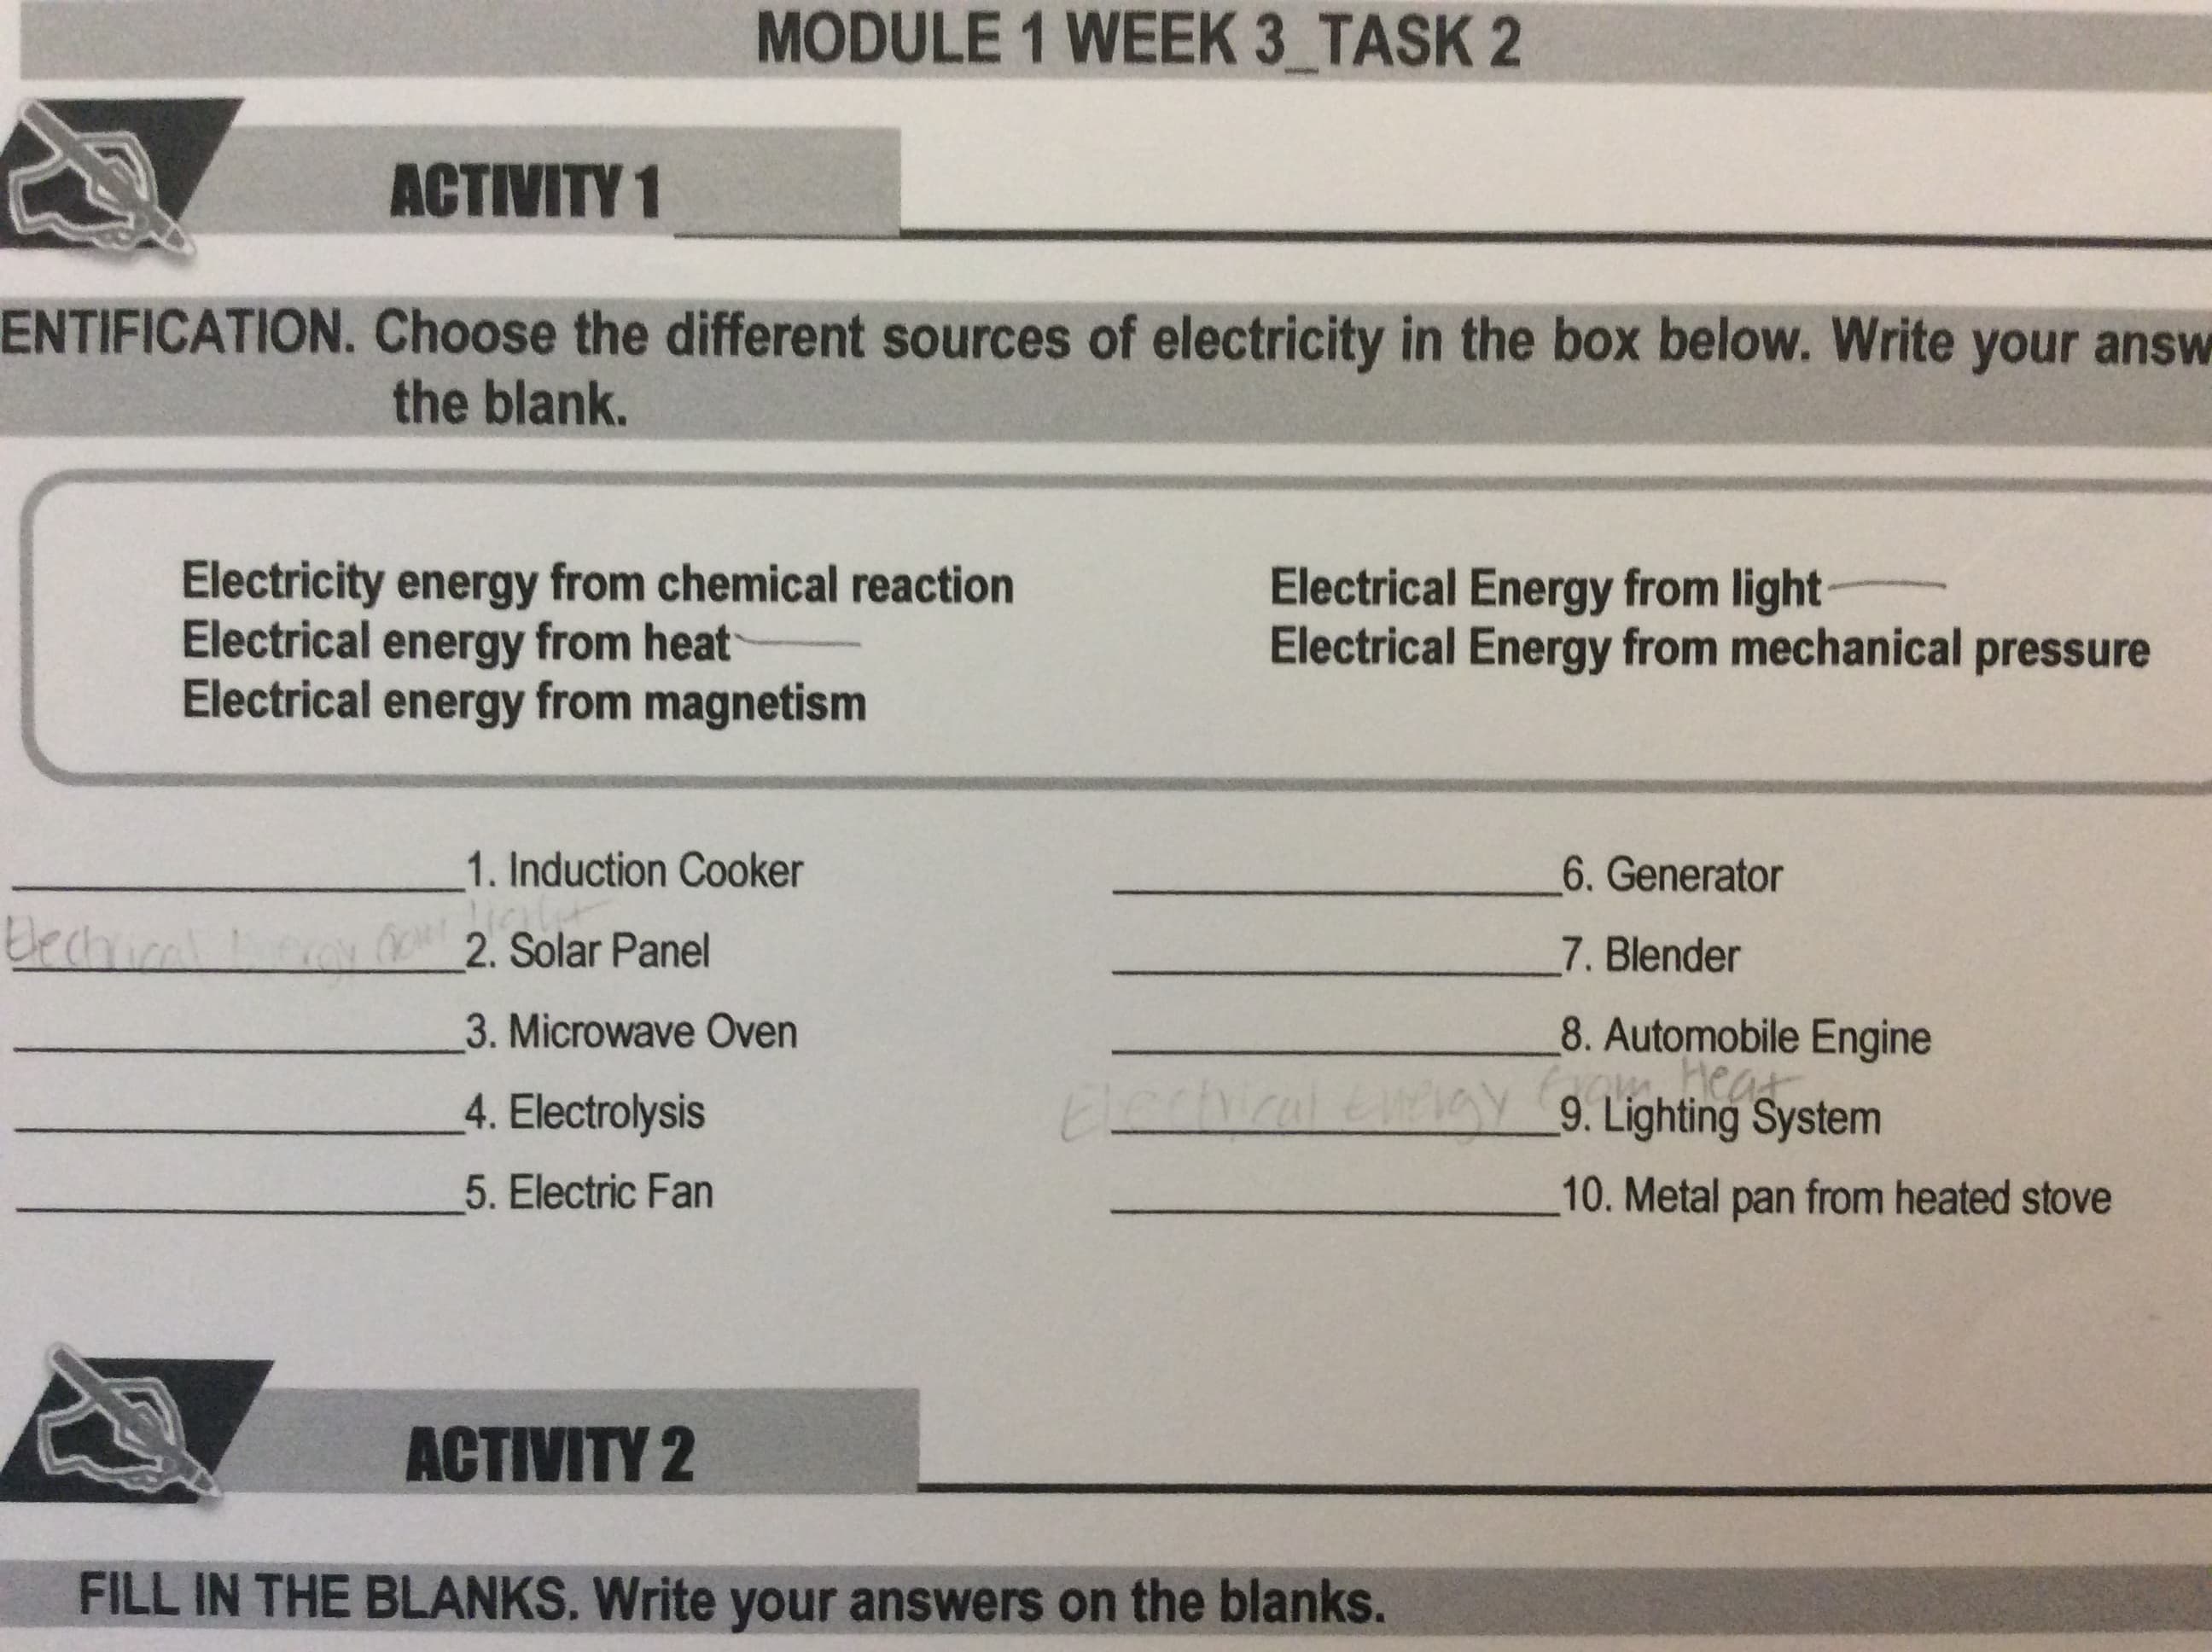 ENTIFICATION. Choose the different sources of electricity in the box below. Write your ansı
the blank.
Electricity energy from chemical reaction
Electrical energy from heat
Electrical energy from magnetism
Electrical Energy from light
Electrical Energy from mechanical pressure
1. Induction Cooker
6. Generator
2. Solar Panel
7. Blender
8. Automobile Engine
Heat
ay 9. Lighting System
3. Microwave Oven
4. Electrolysis
5. Electric Fan
10. Metal pan from heated stove
